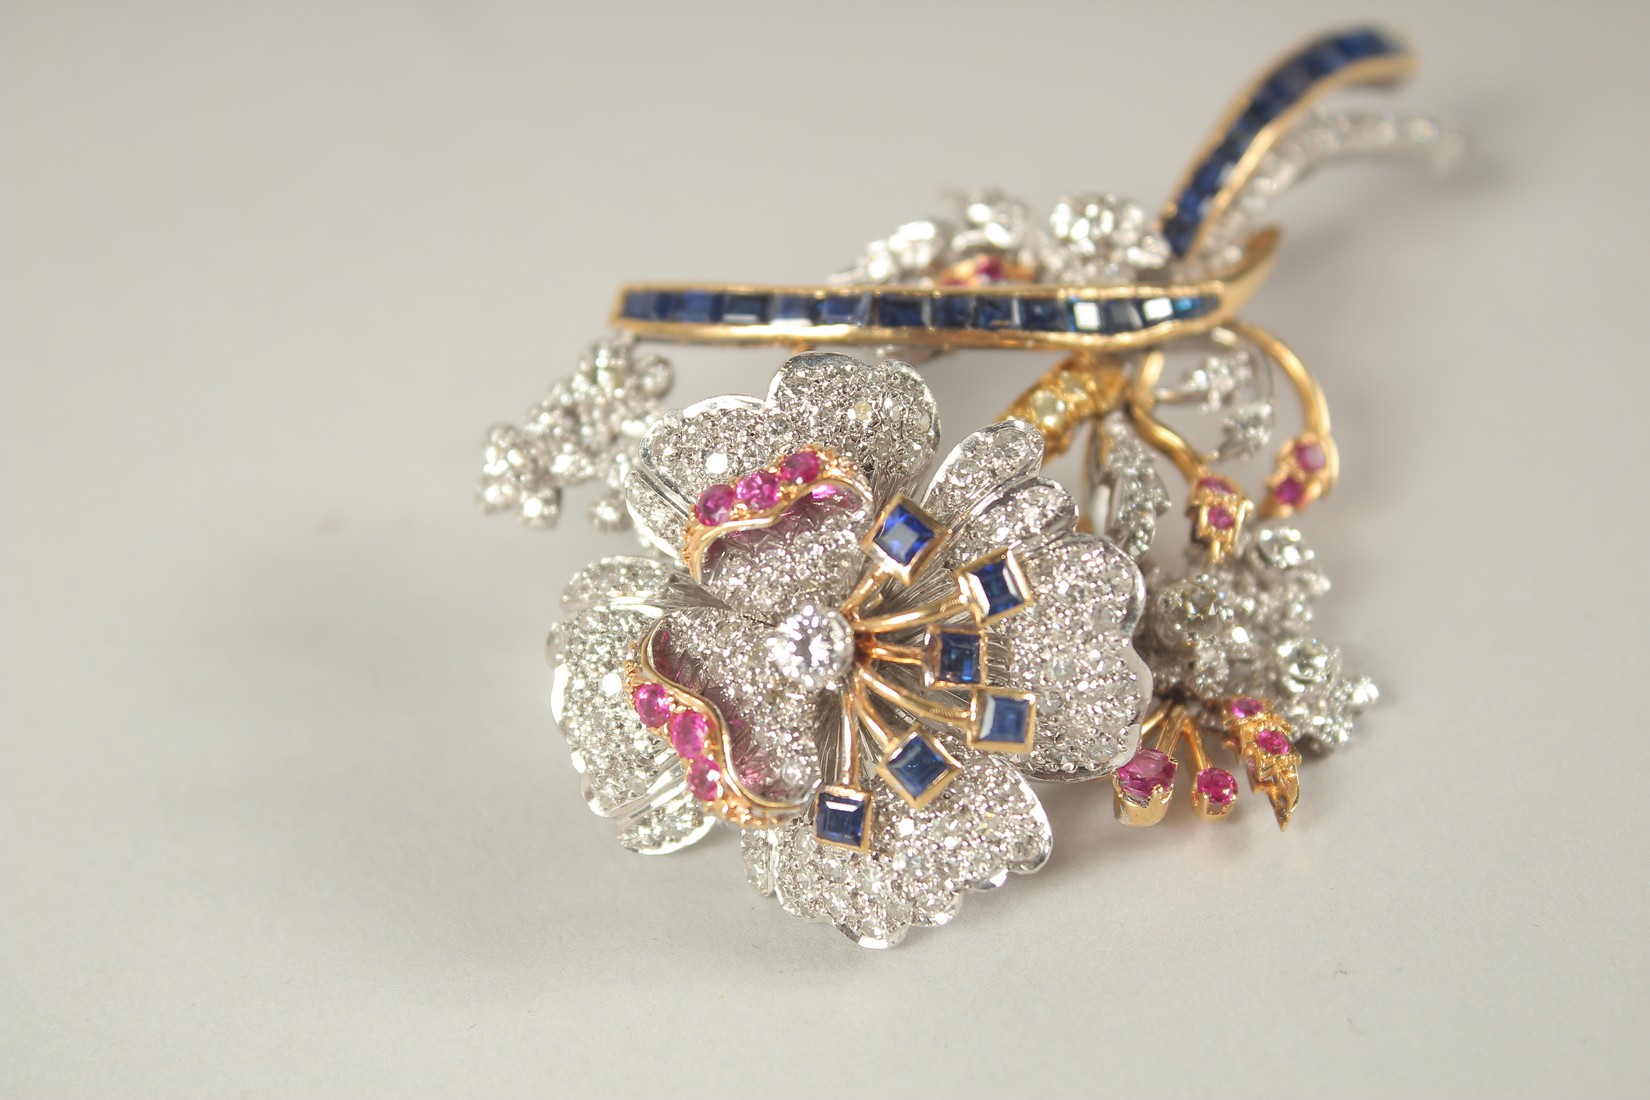 A SUPERB 18CT GOLD, DIAMOND, RUBY AND SAPPHIRE TREMBLING FLOWER BROOCH. 35grams. - Image 2 of 5